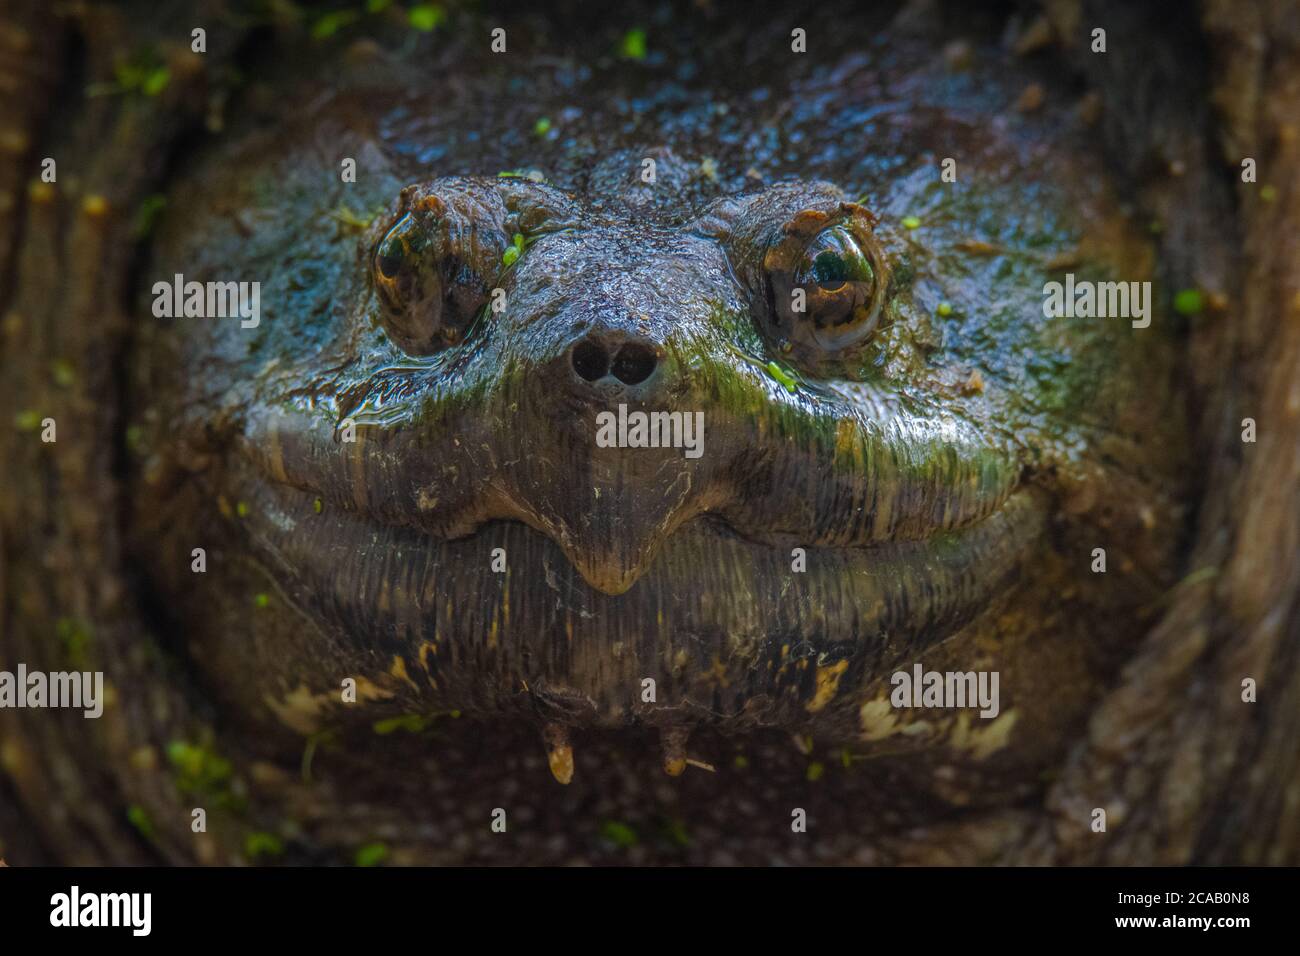 Florida Snapping Turtle close-up Stock Photo